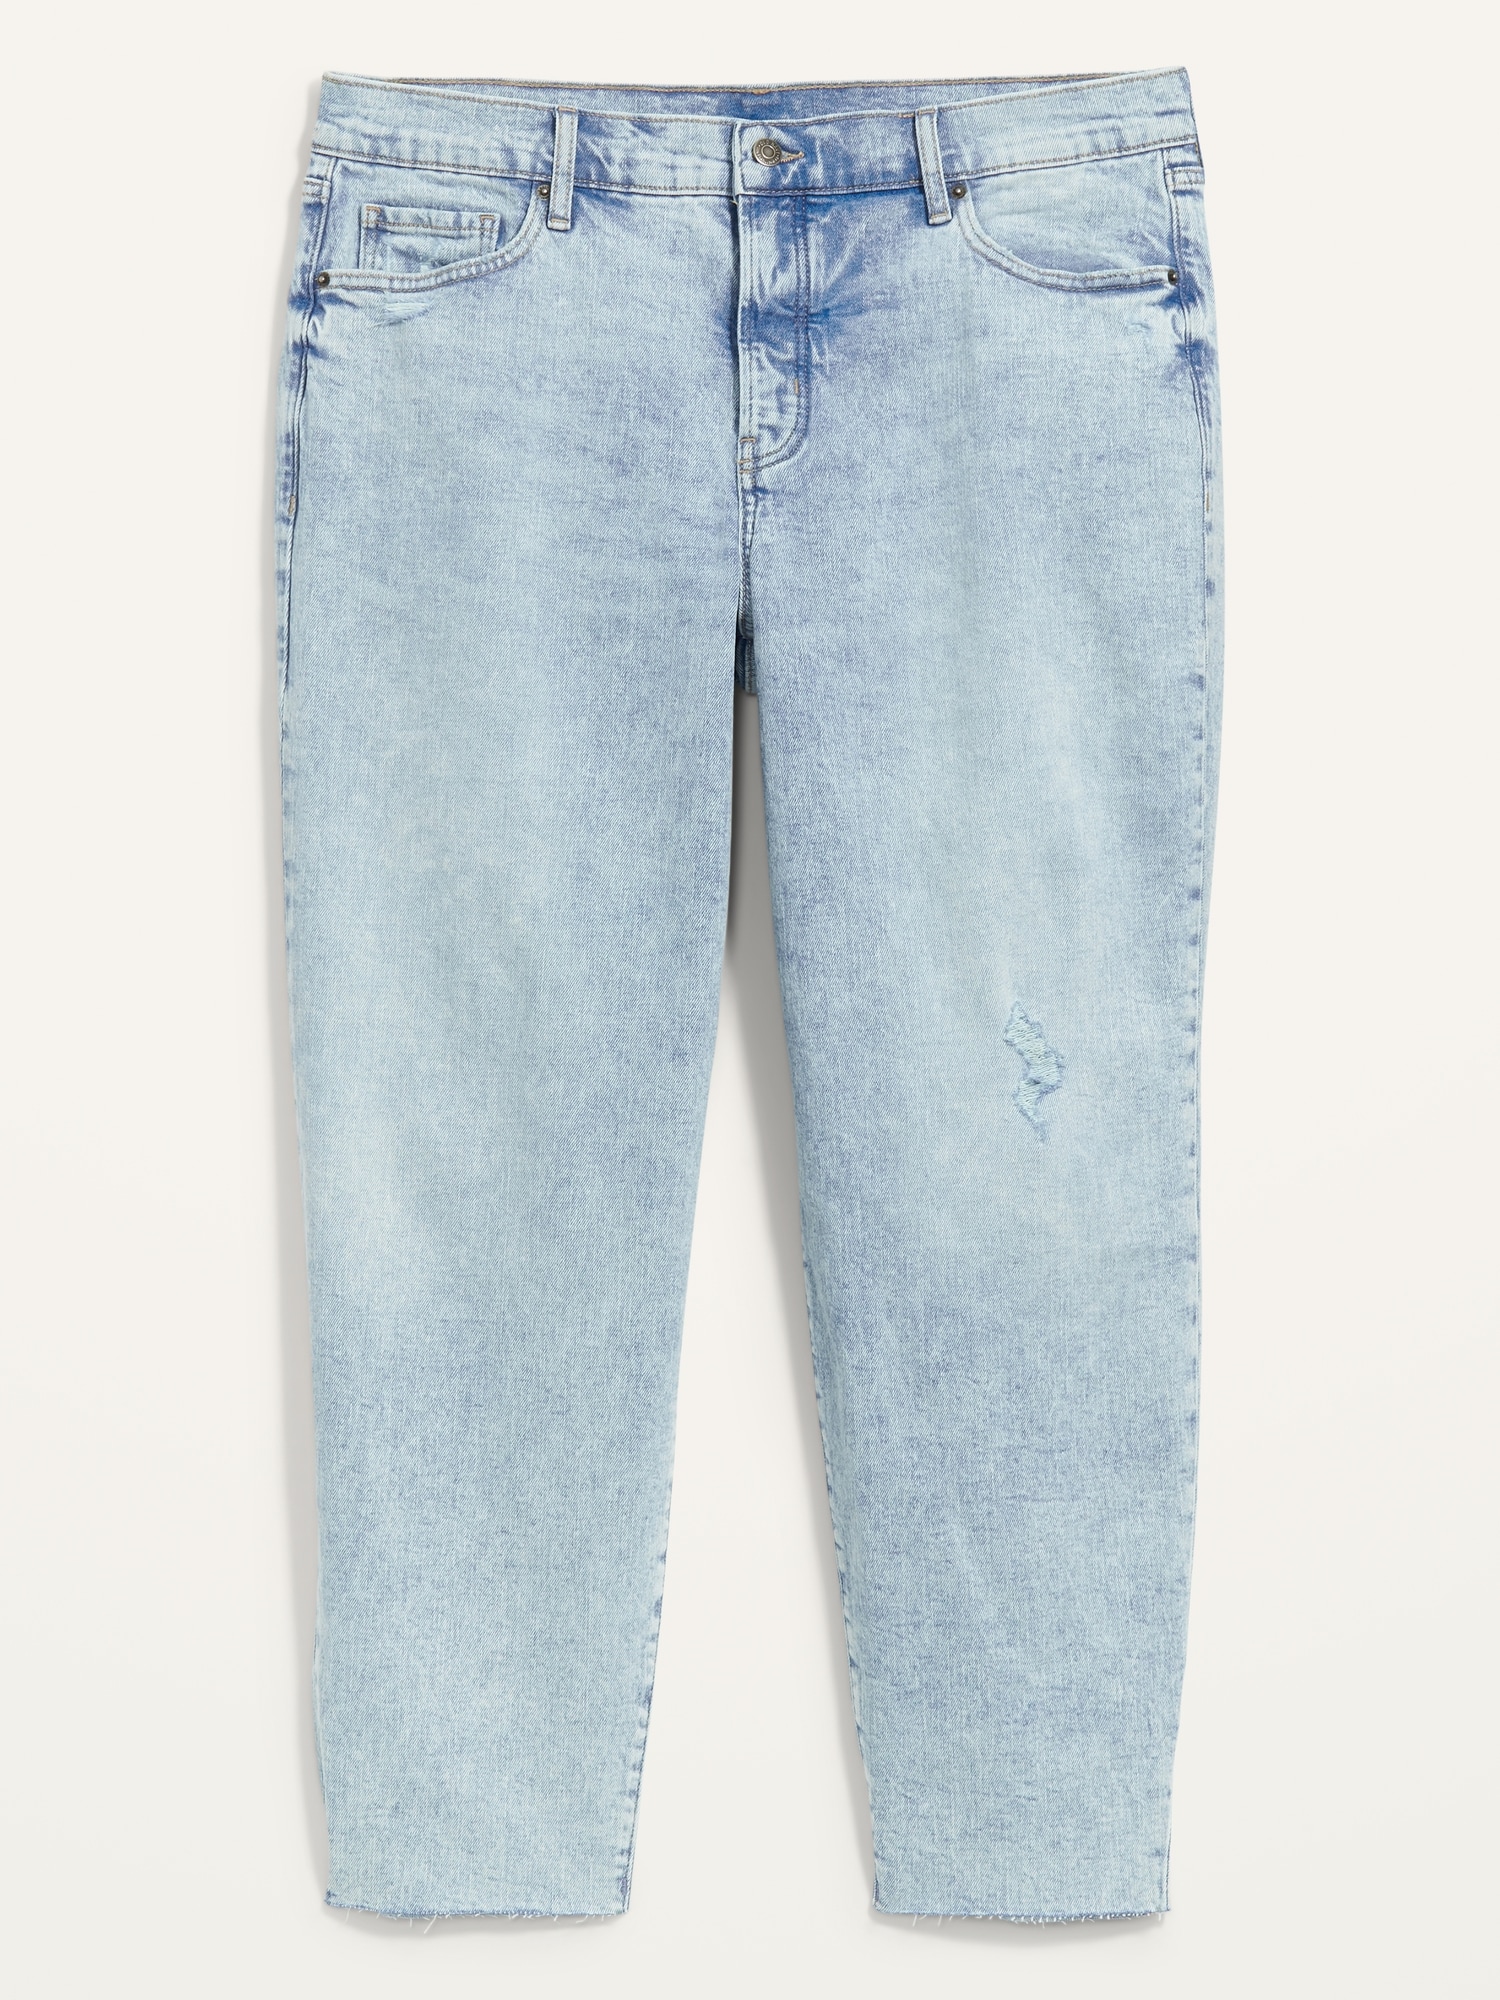 A perfect pair of high-waisted jeans, reinvented with a button fly to hide  bumps and lumps and make yo…